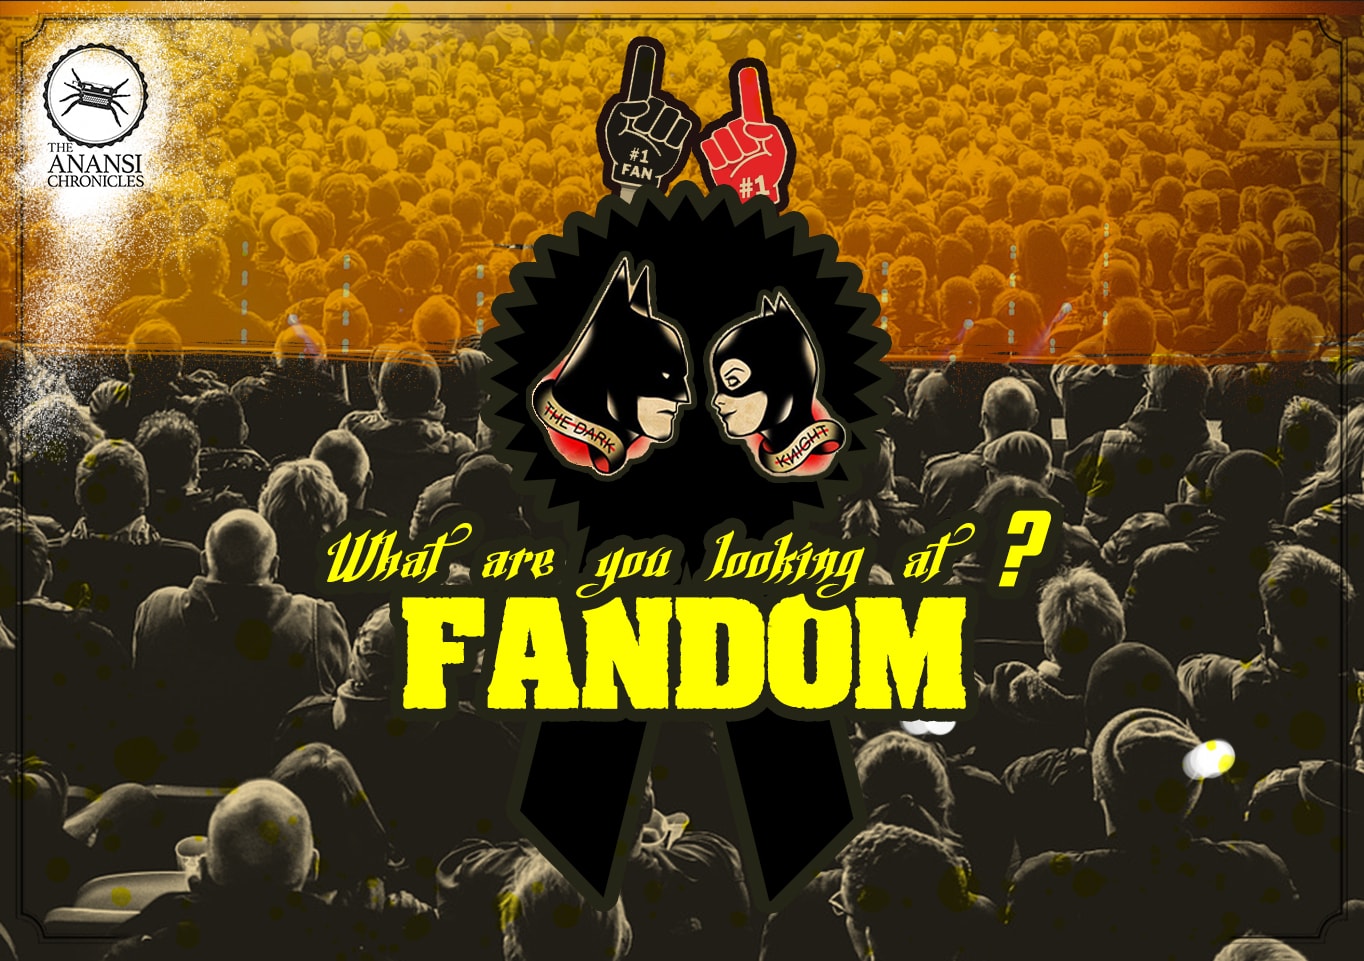 Fandom – What are you looking at?